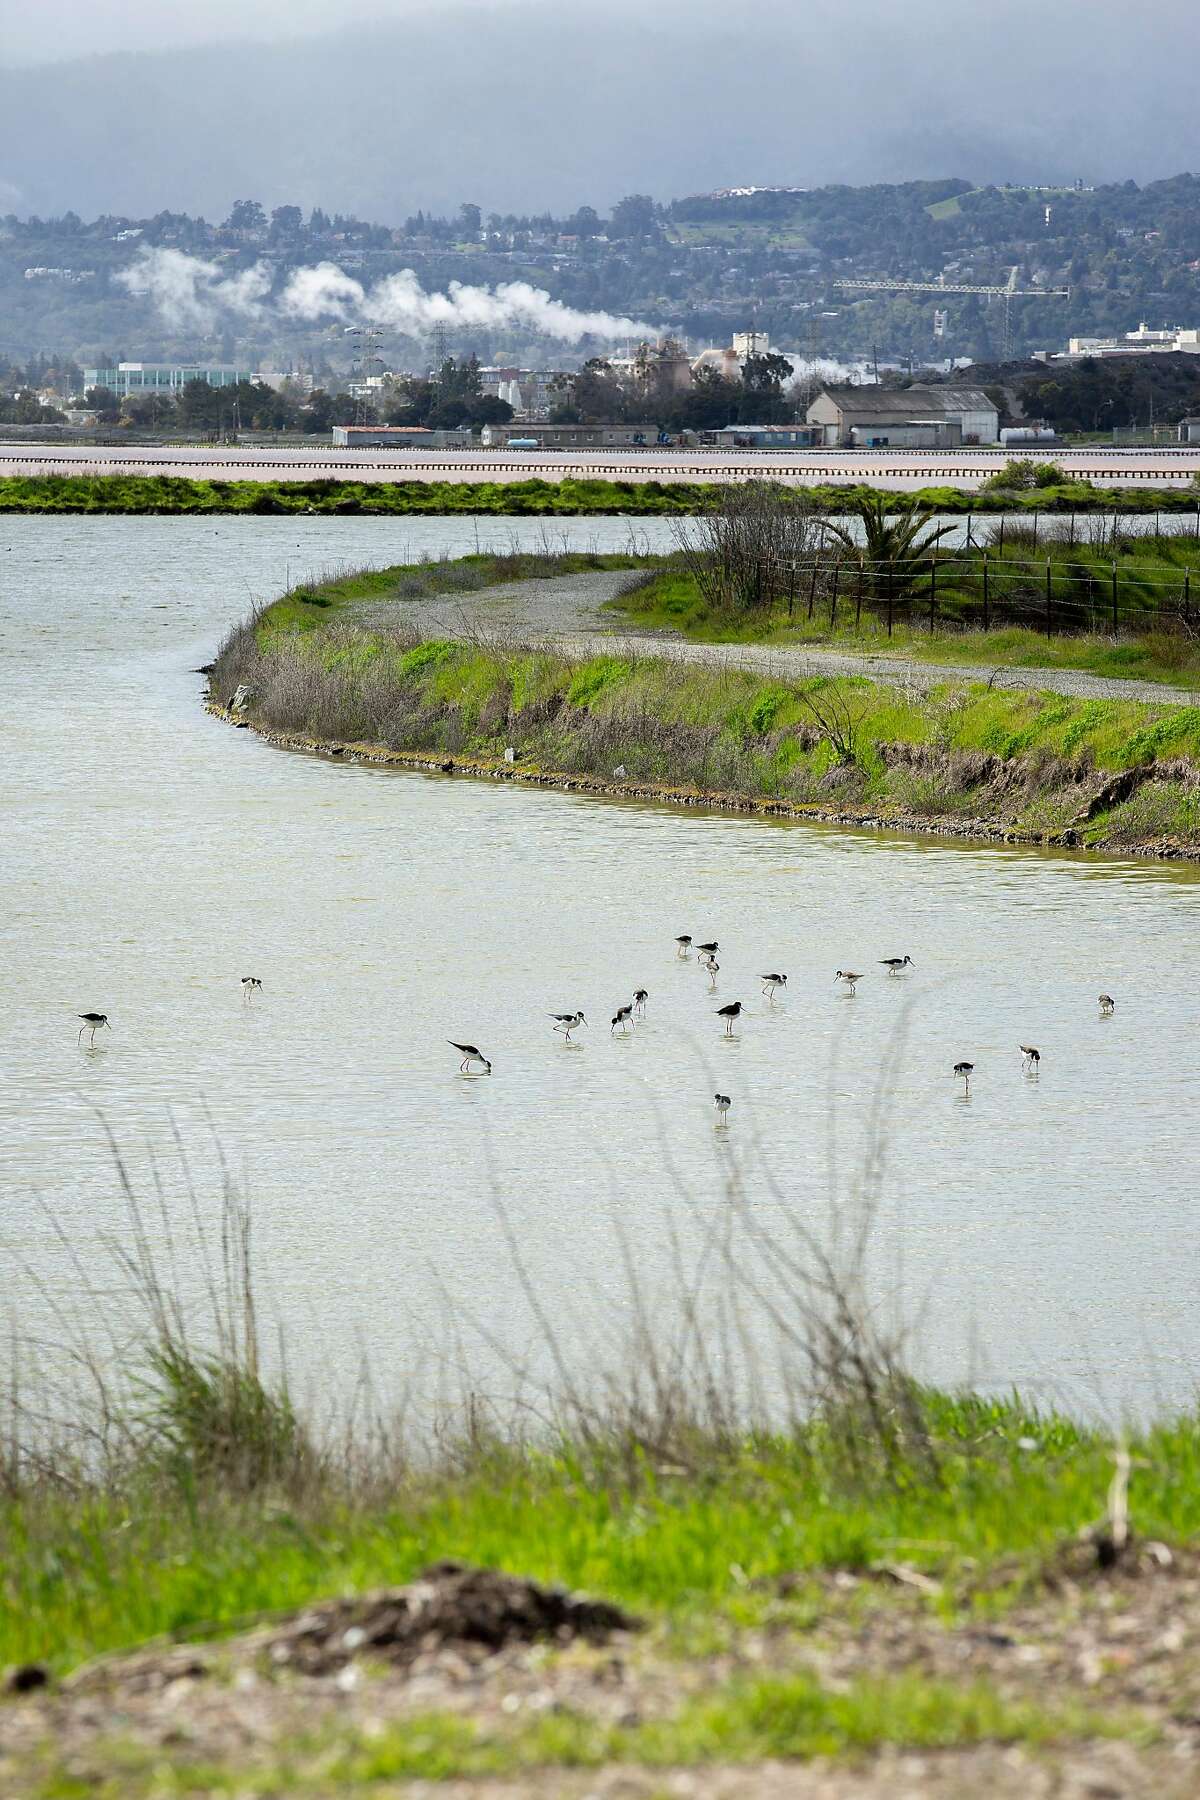 Birds at the Cargill property near the salt ponds on Tuesday, March 12, 2019, in Redwood City, Calif.